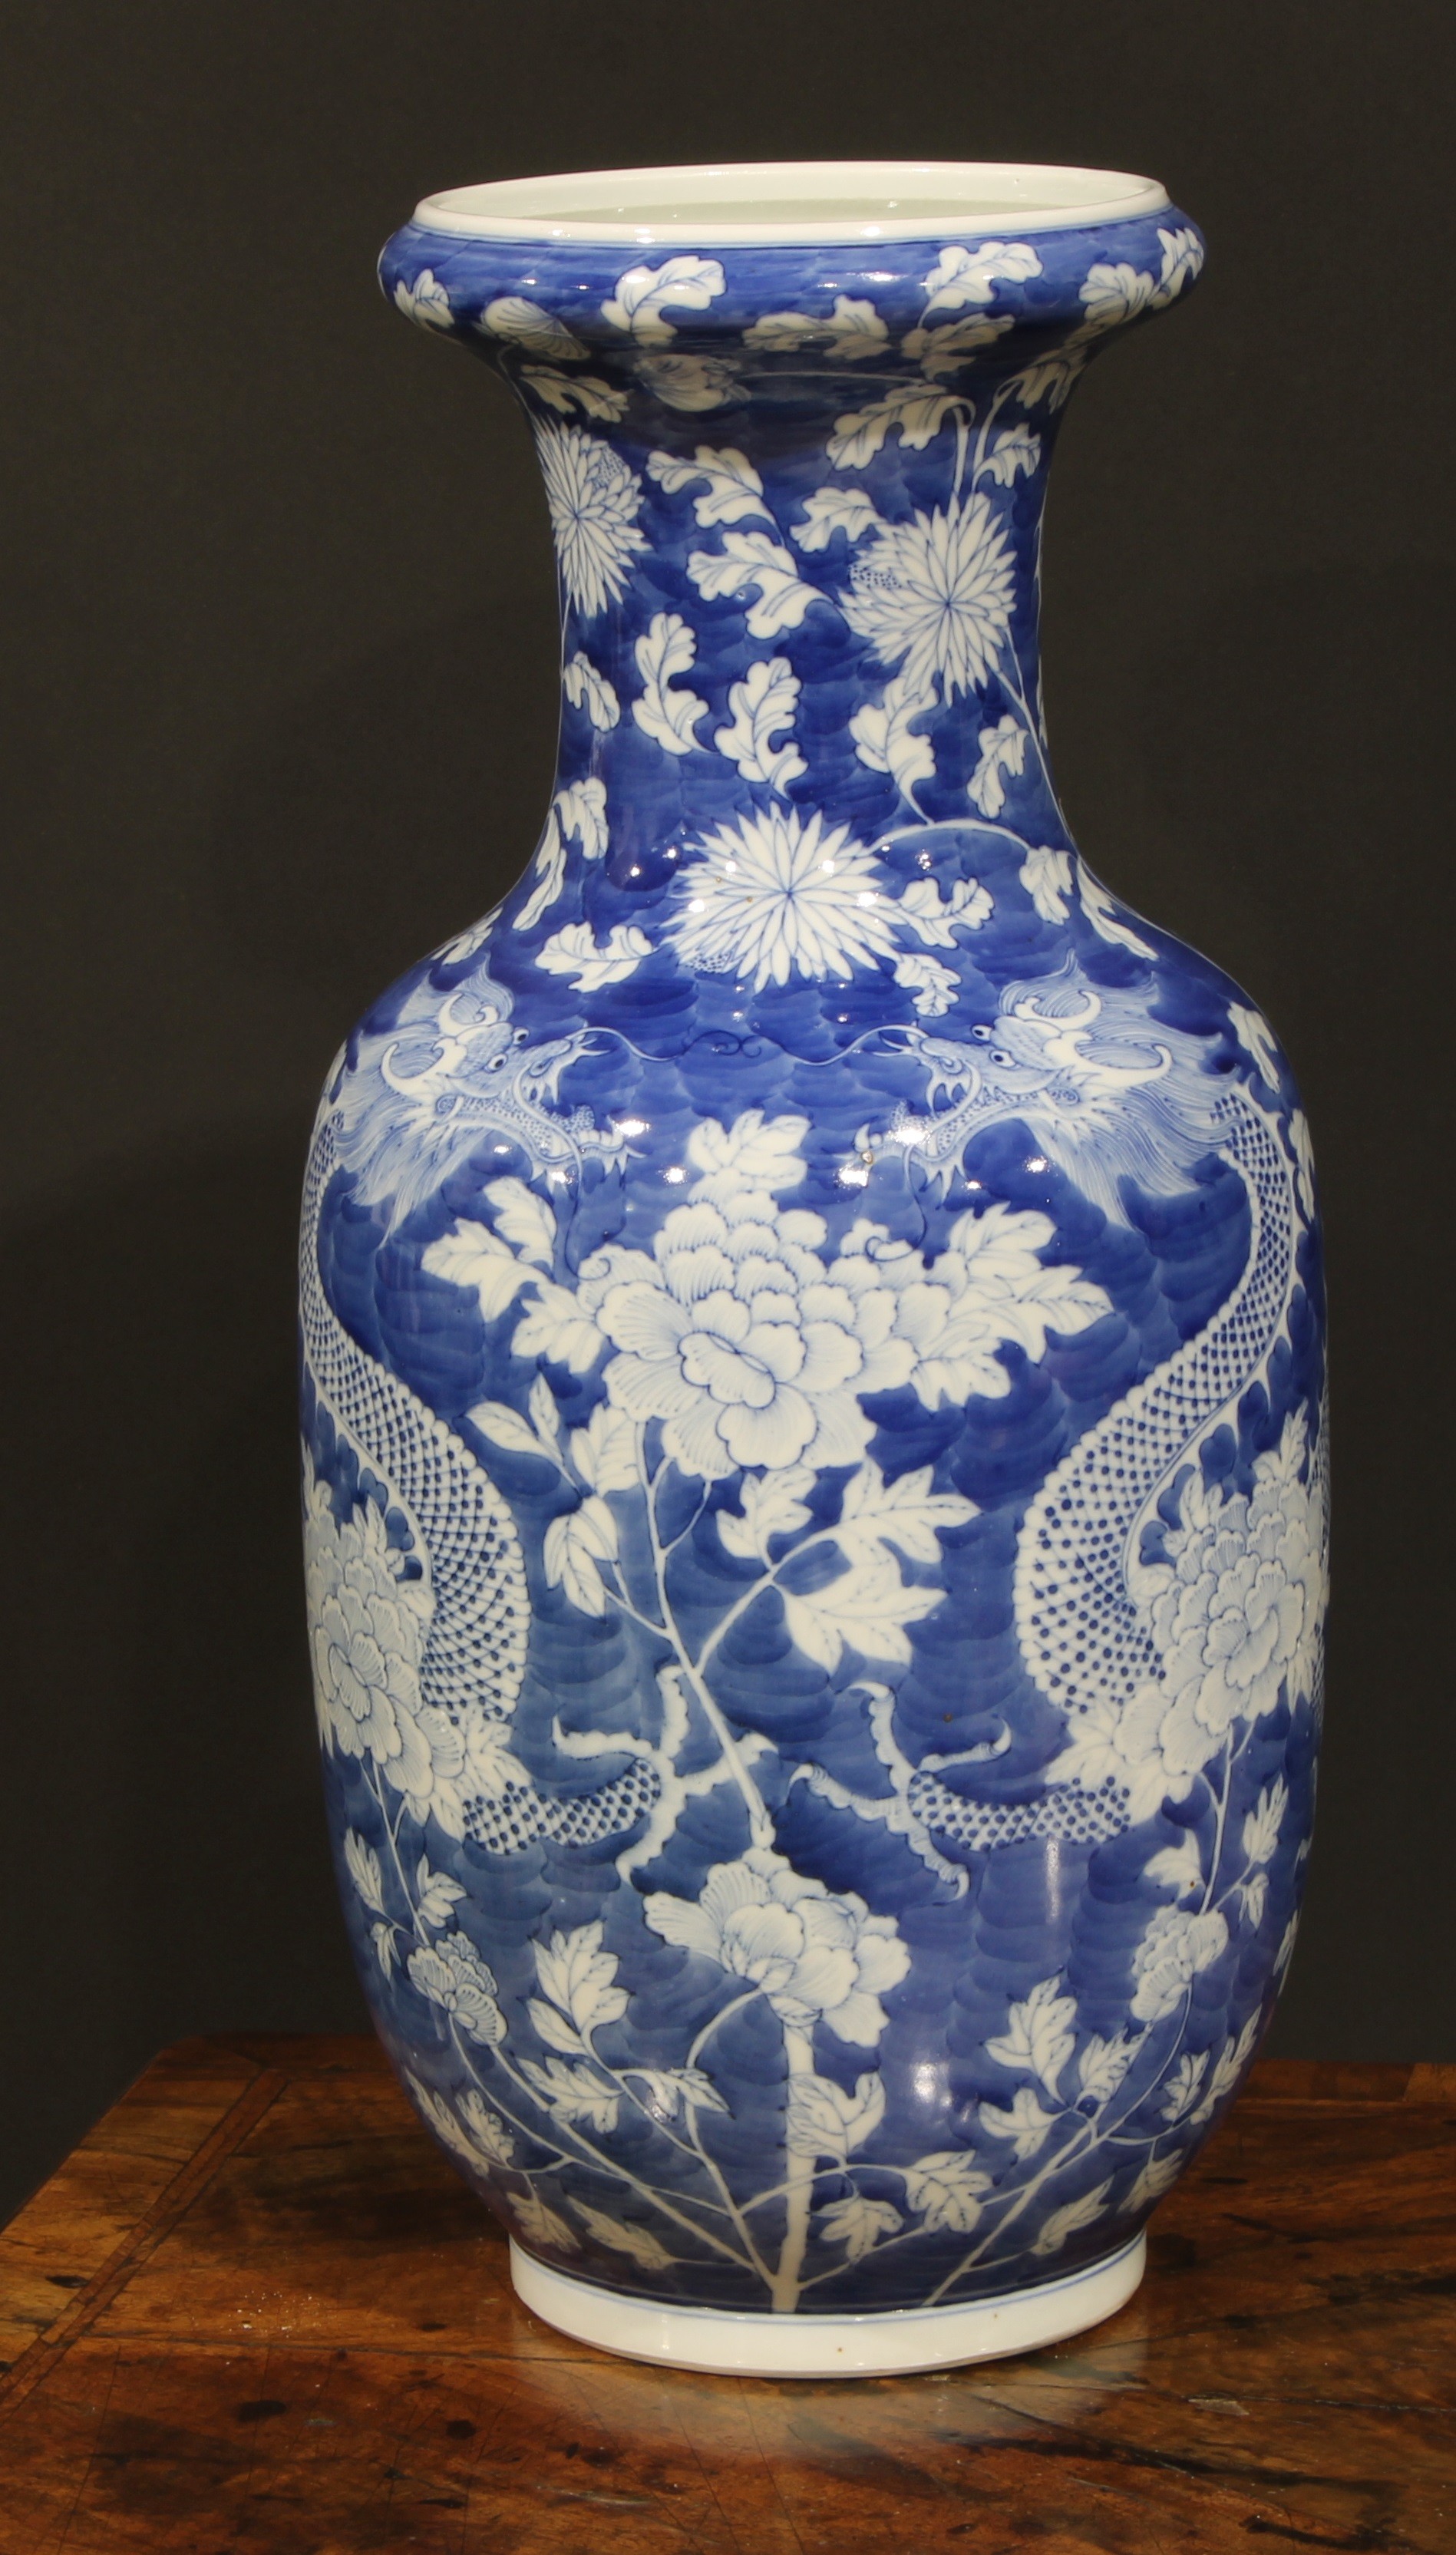 A large Chinese ovoid vase, painted in tones of underglaze blue with dragons amongst flowers and